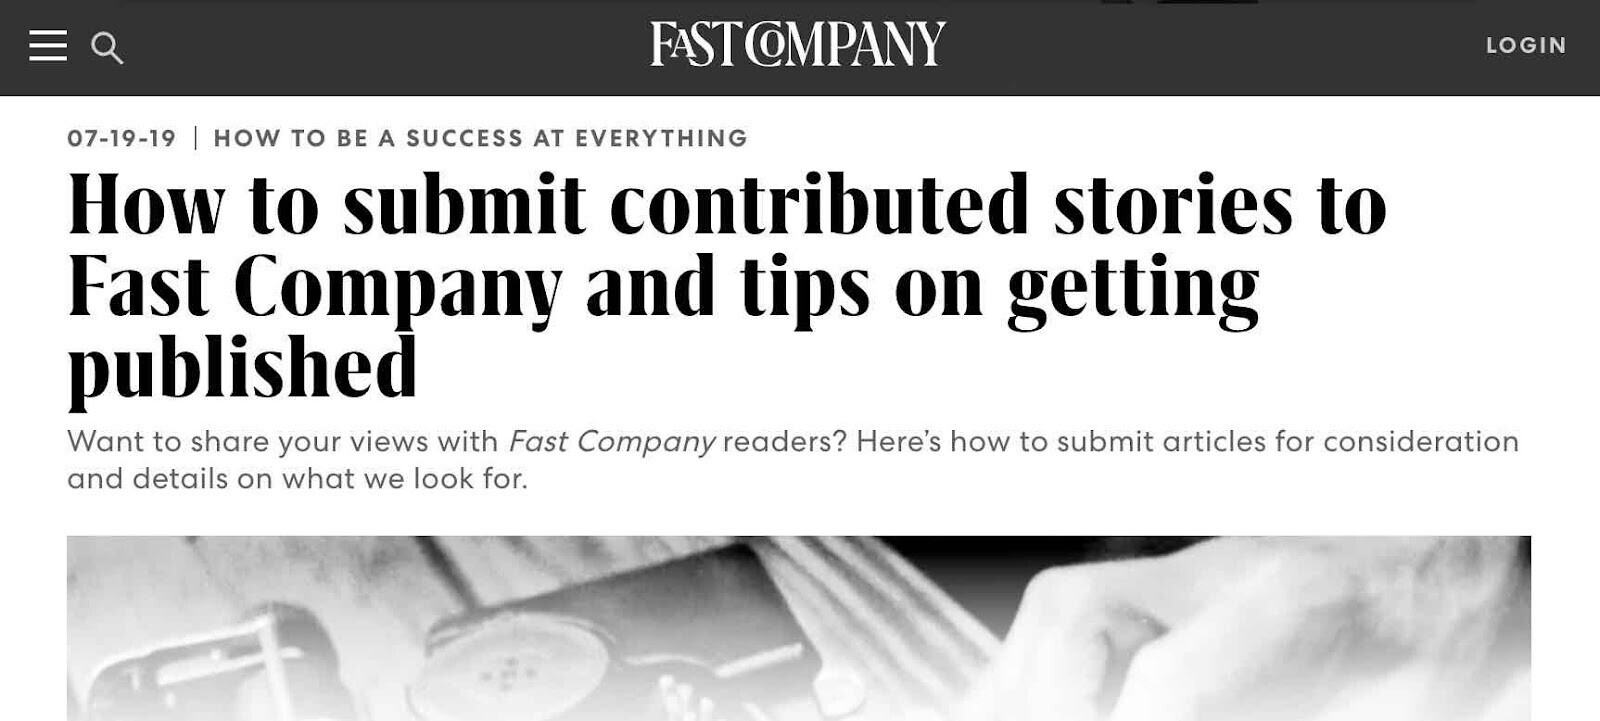 How to submit stories article